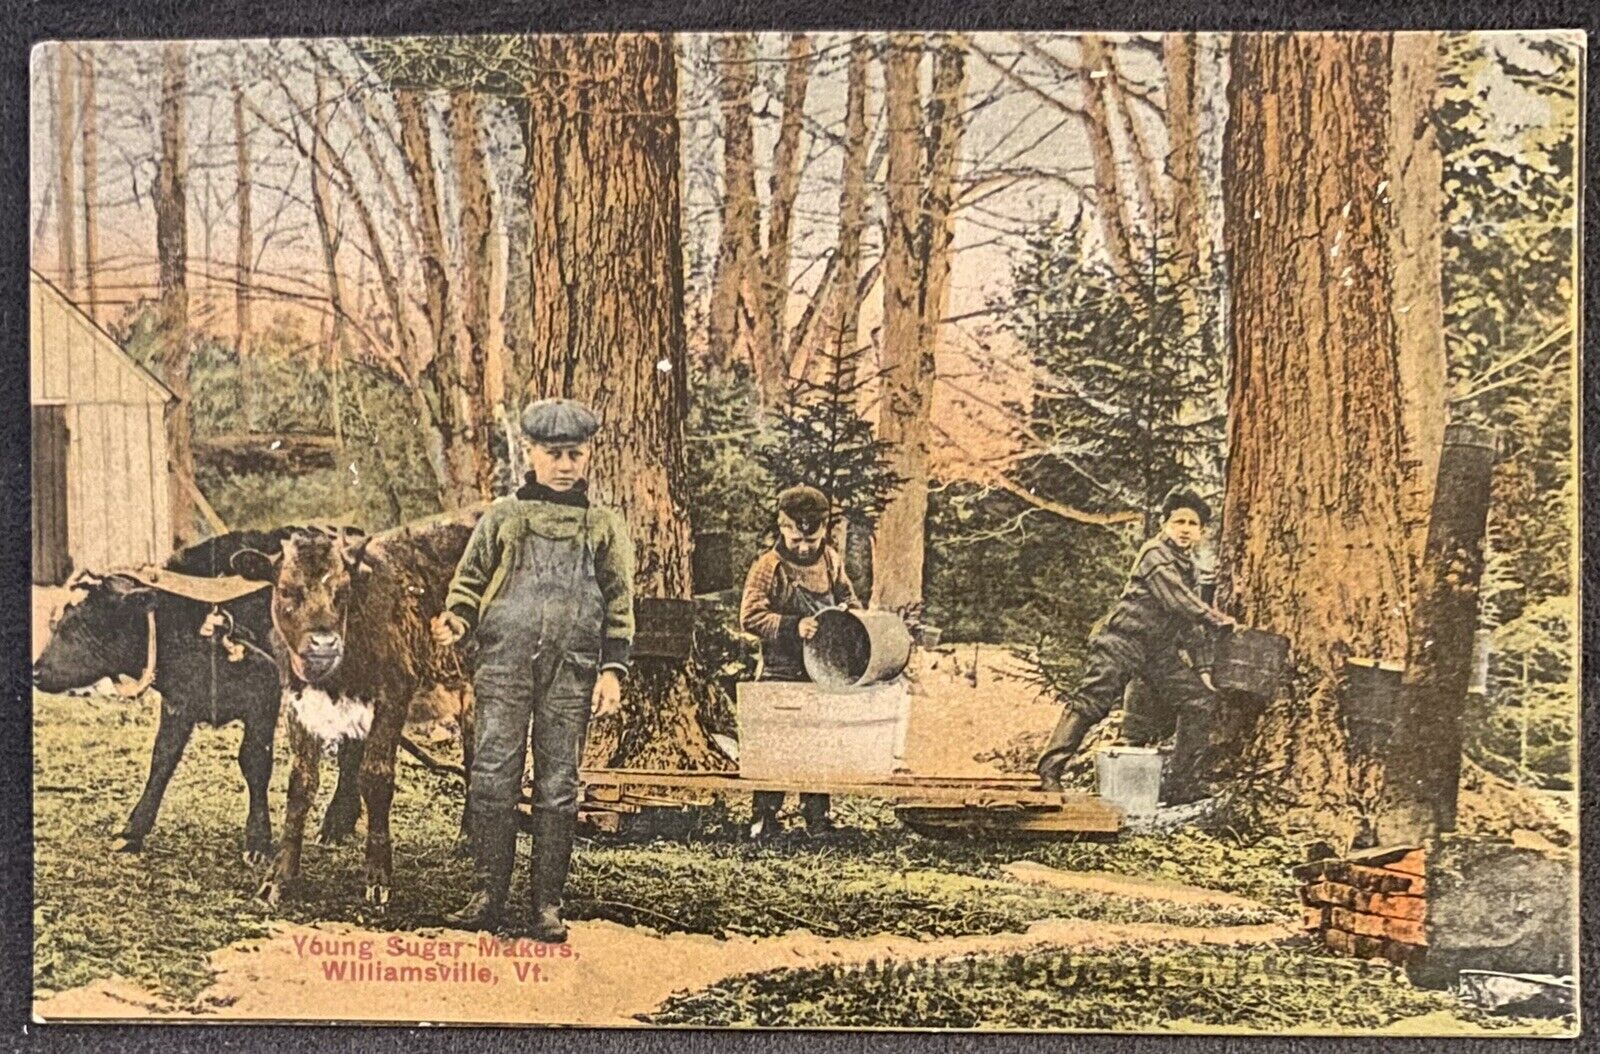 Williamsville VT Young Sugar Makers~3 Boys Making Maple Syrup~Antique Postcard